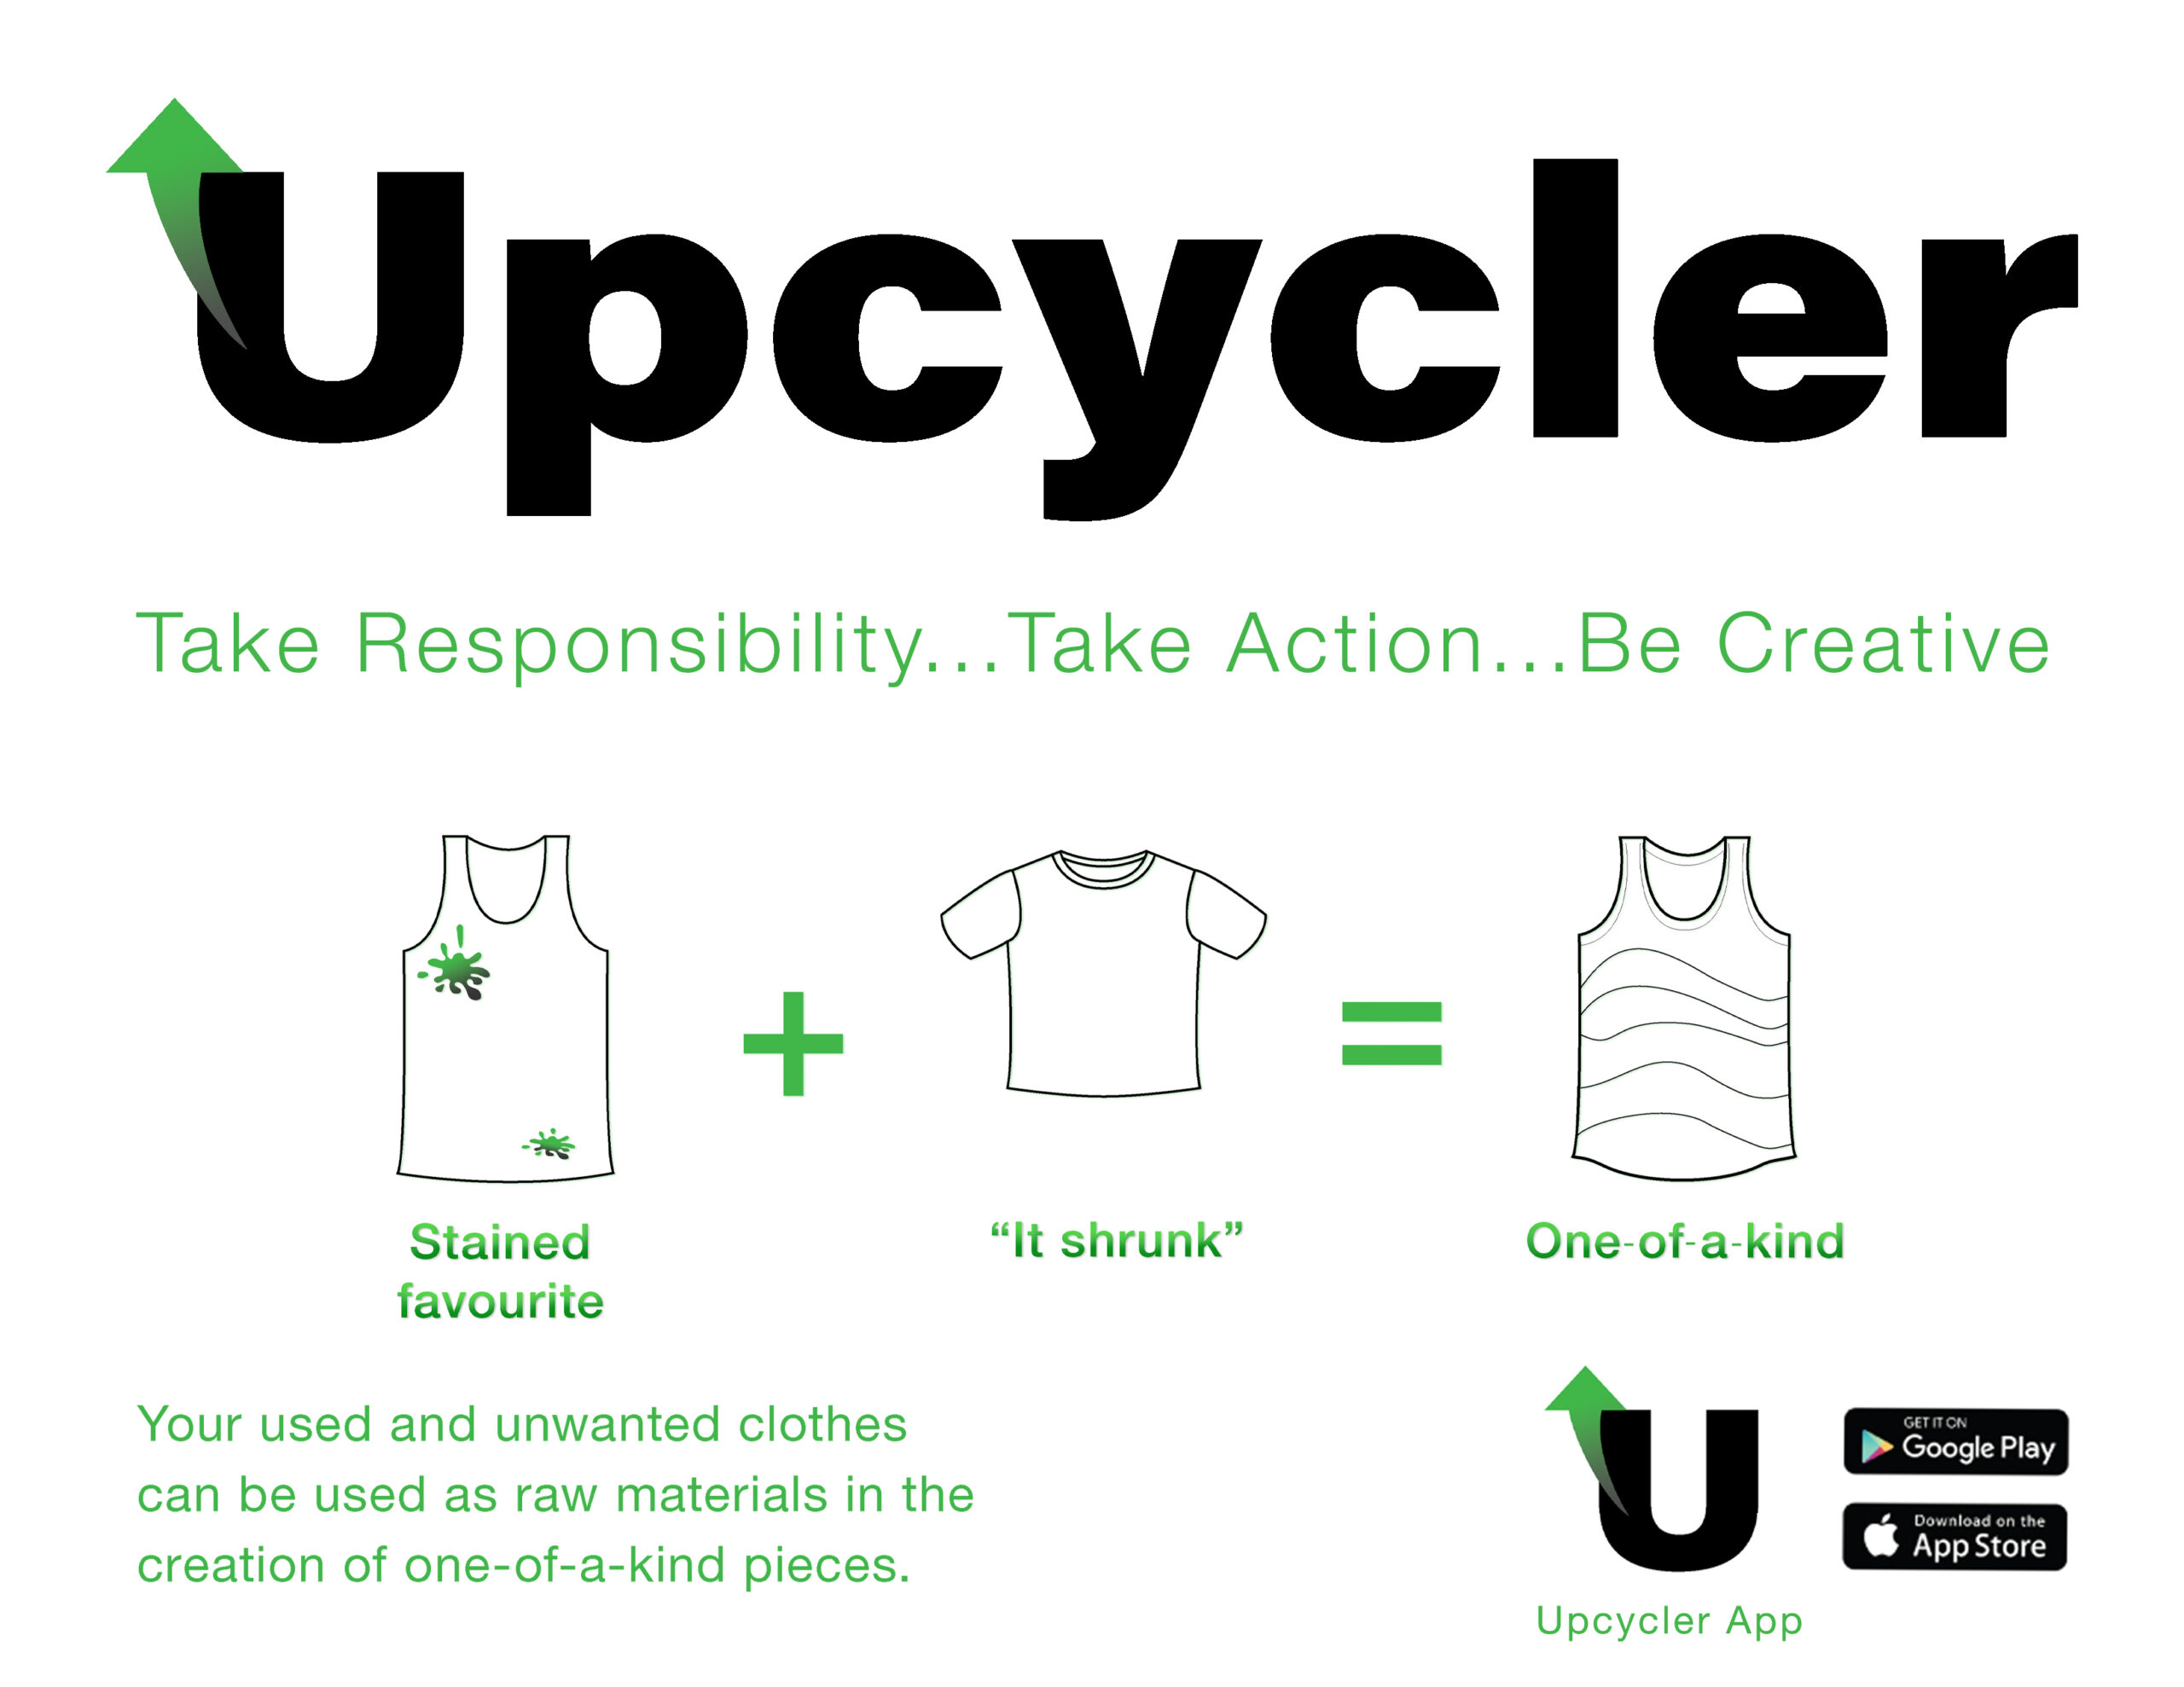 Advertisment of the Upcycler App. JPEG. 11x8.5.